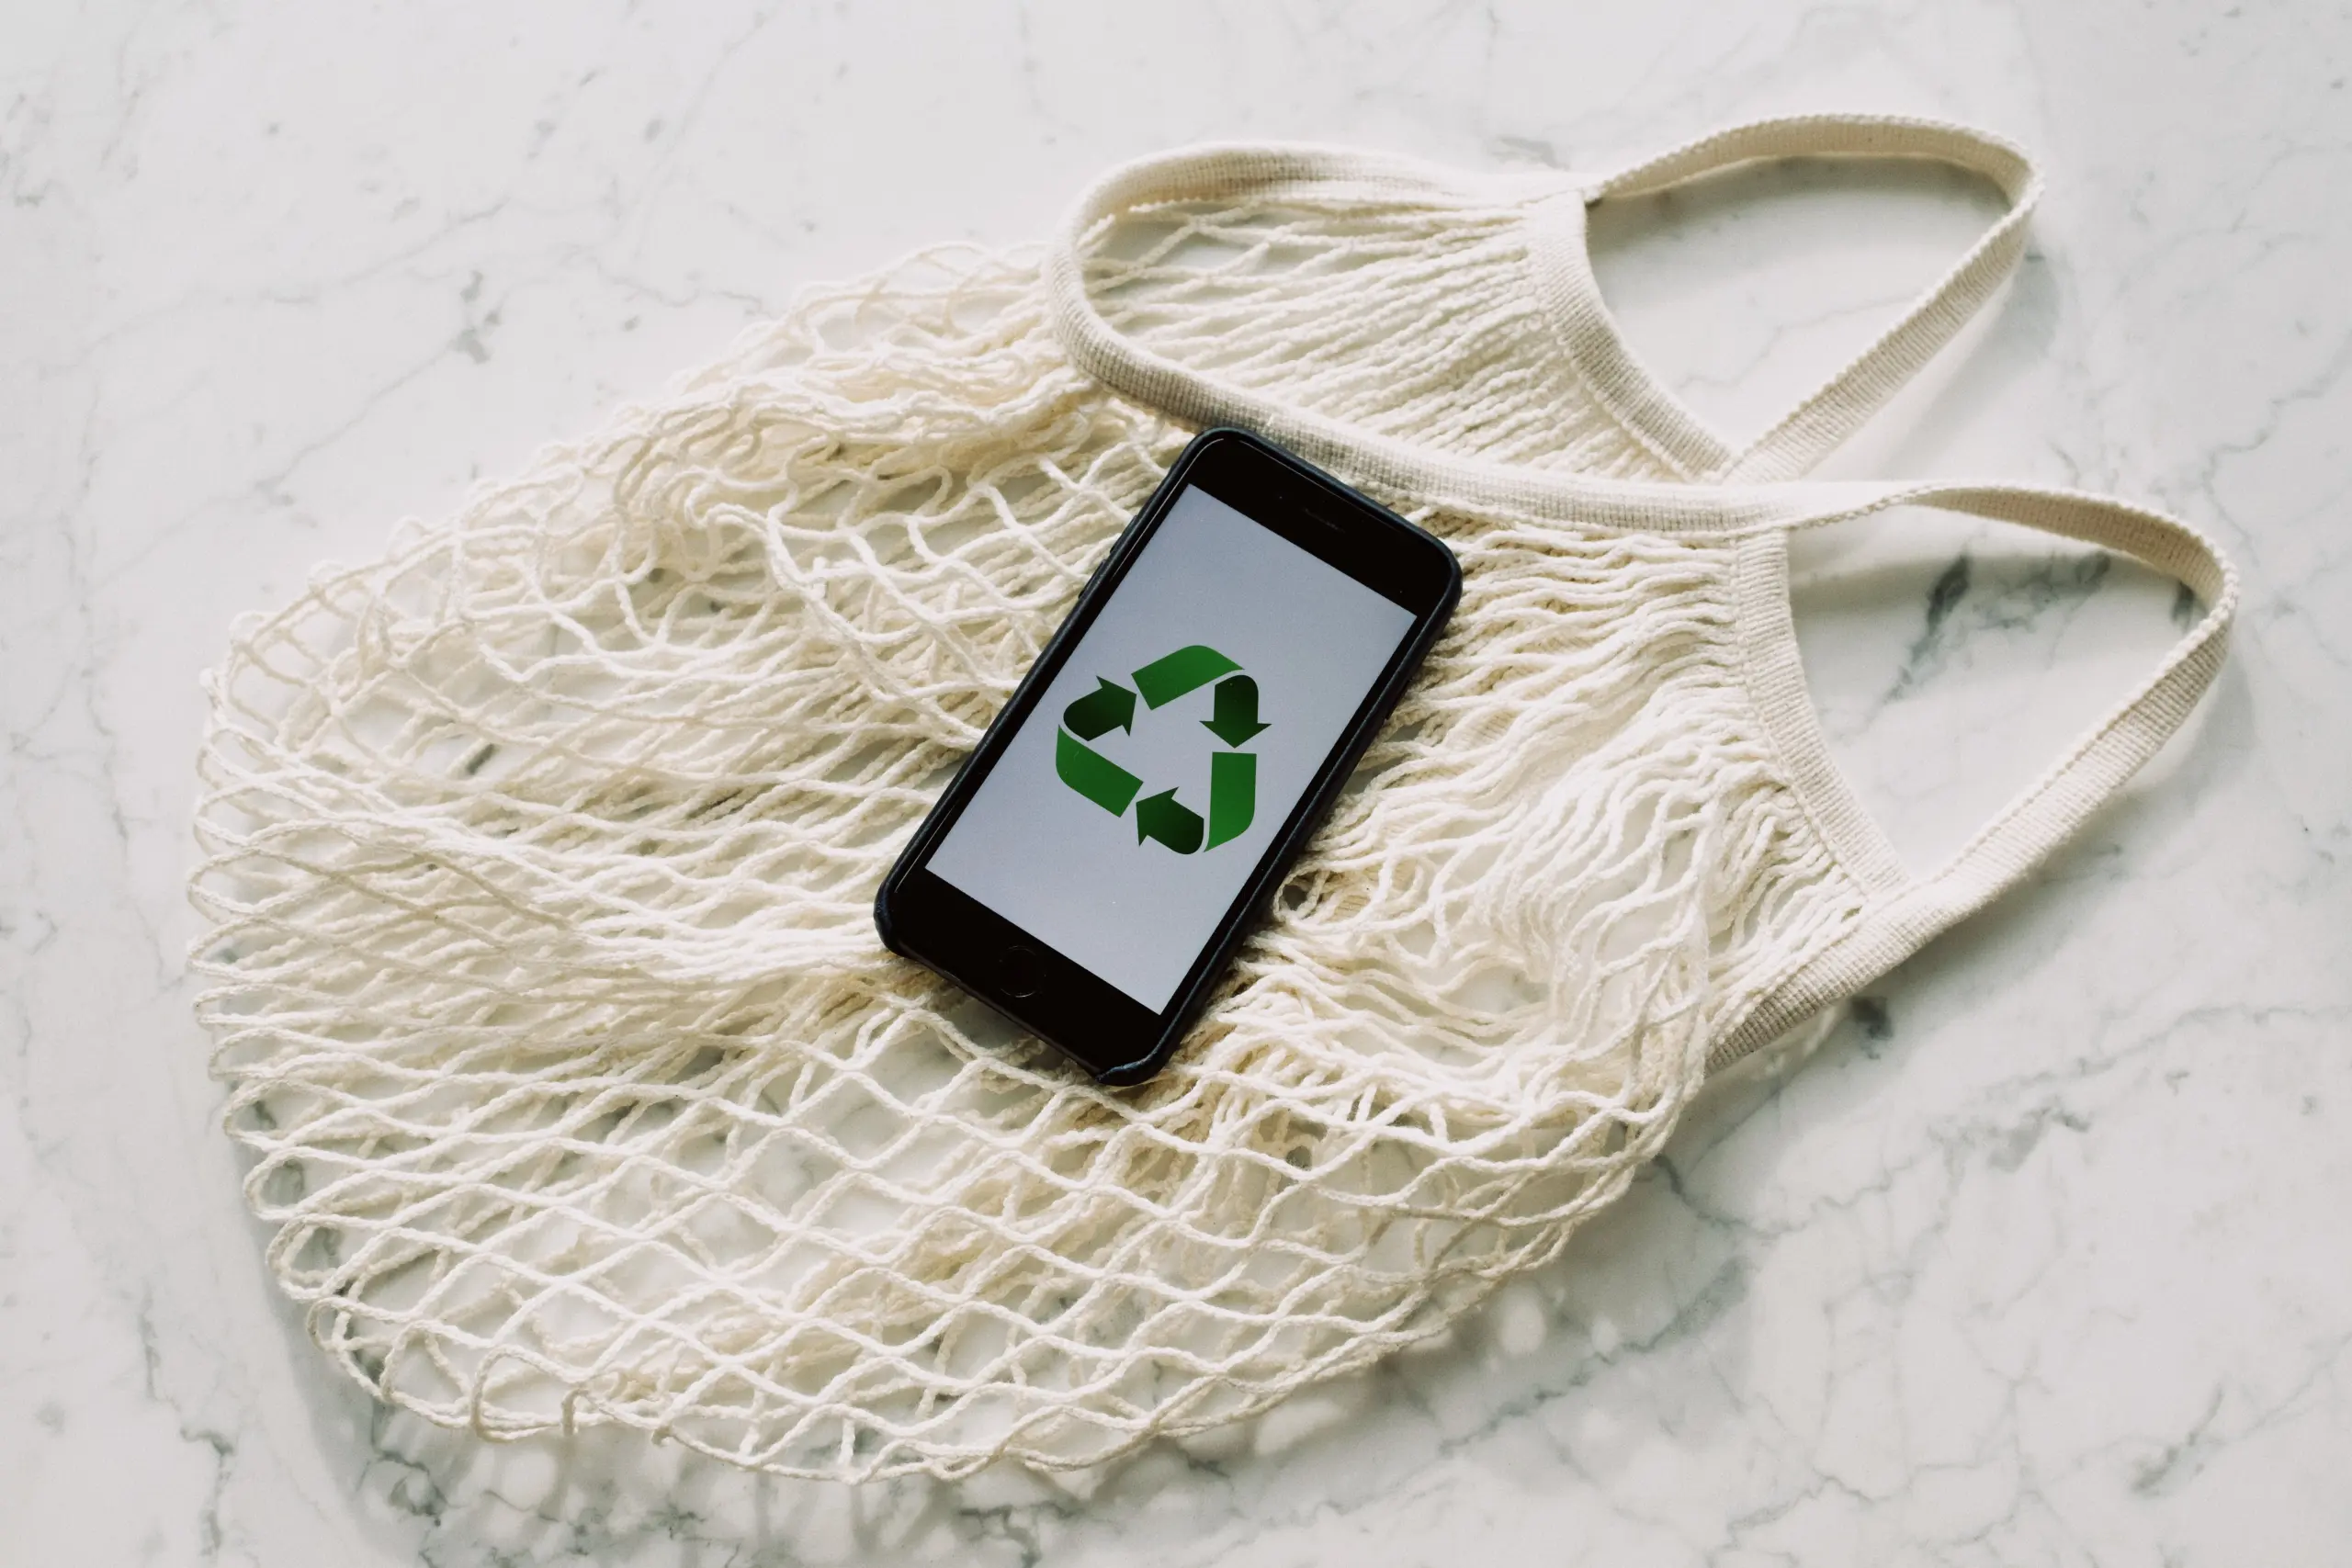 An organic shopping bag serving as a backdrop for an iPhone displaying a sustainability symbol with three green arrows on its screen. The composition conveys a message of environmentally conscious practices, combining technology and eco-friendly choices.